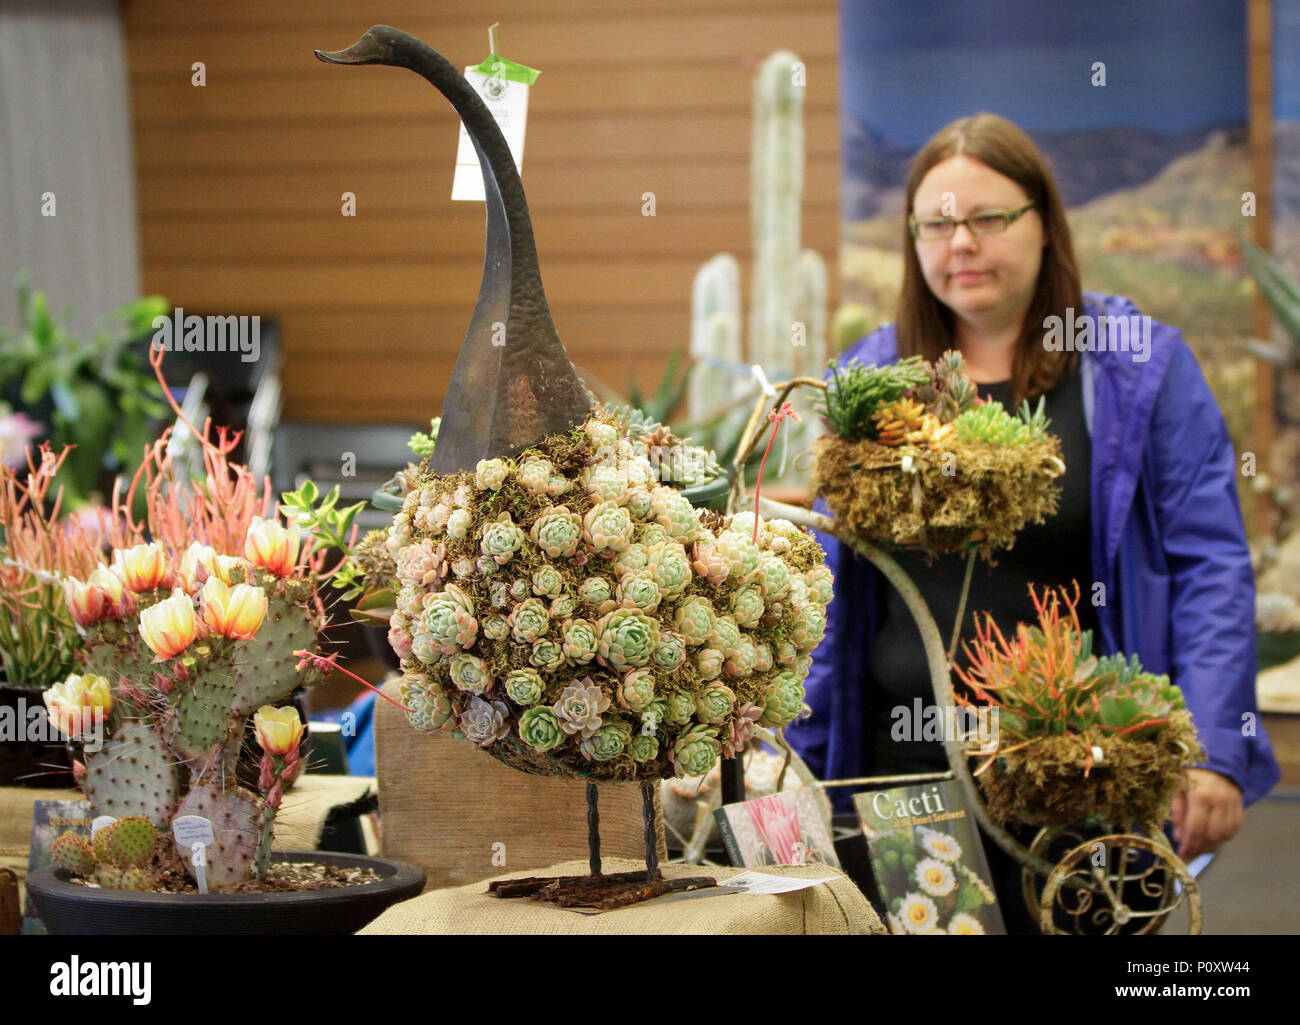 Vancouver, Canada. 9th June, 2018. A visitor looks at different cactus and succulent plants at the Vancouver Desert Plant Show in Vancouver, Canada, June 9, 2018. The annual Vancouver Desert Plant Show is a two-day event to provide opportunities for the cactus and succulent plants enthusiasts to show their plants and share planting experiences. Credit: Liang Sen/Xinhua/Alamy Live News Stock Photo